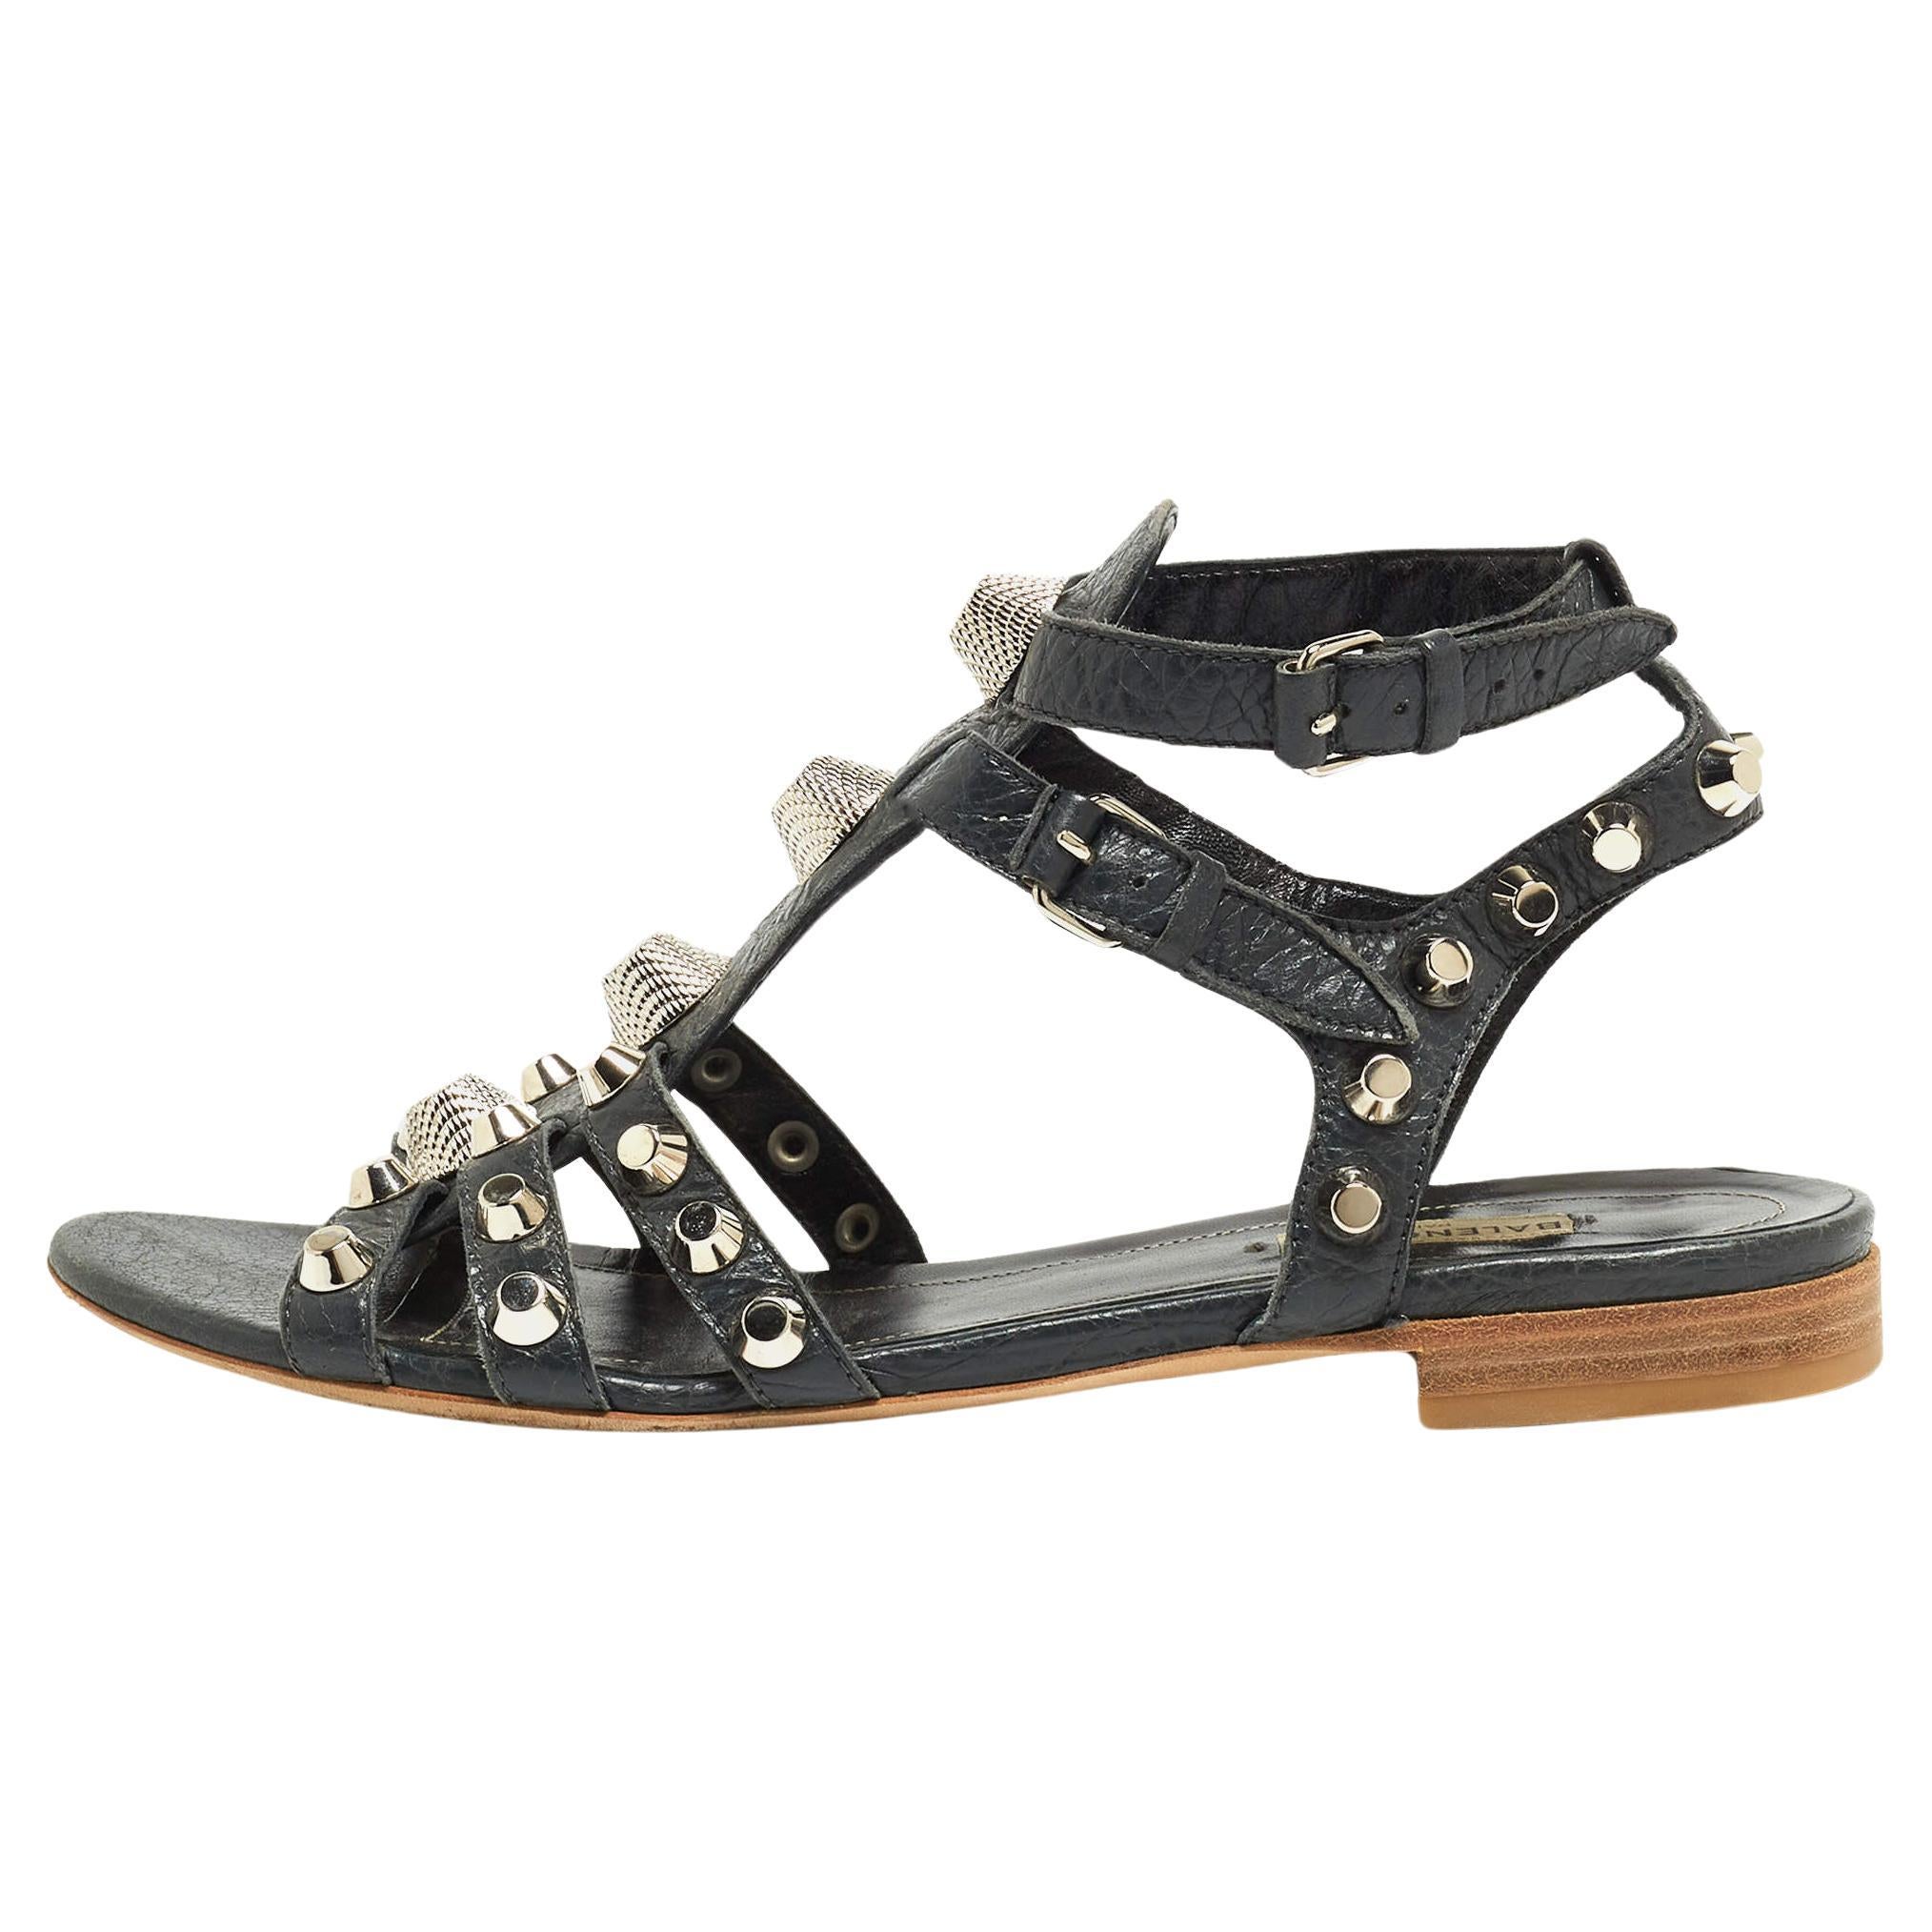 Balenciaga Dark Grey Leather Studded Ankle Strap Flat Sandals Size 39.5 For Sale